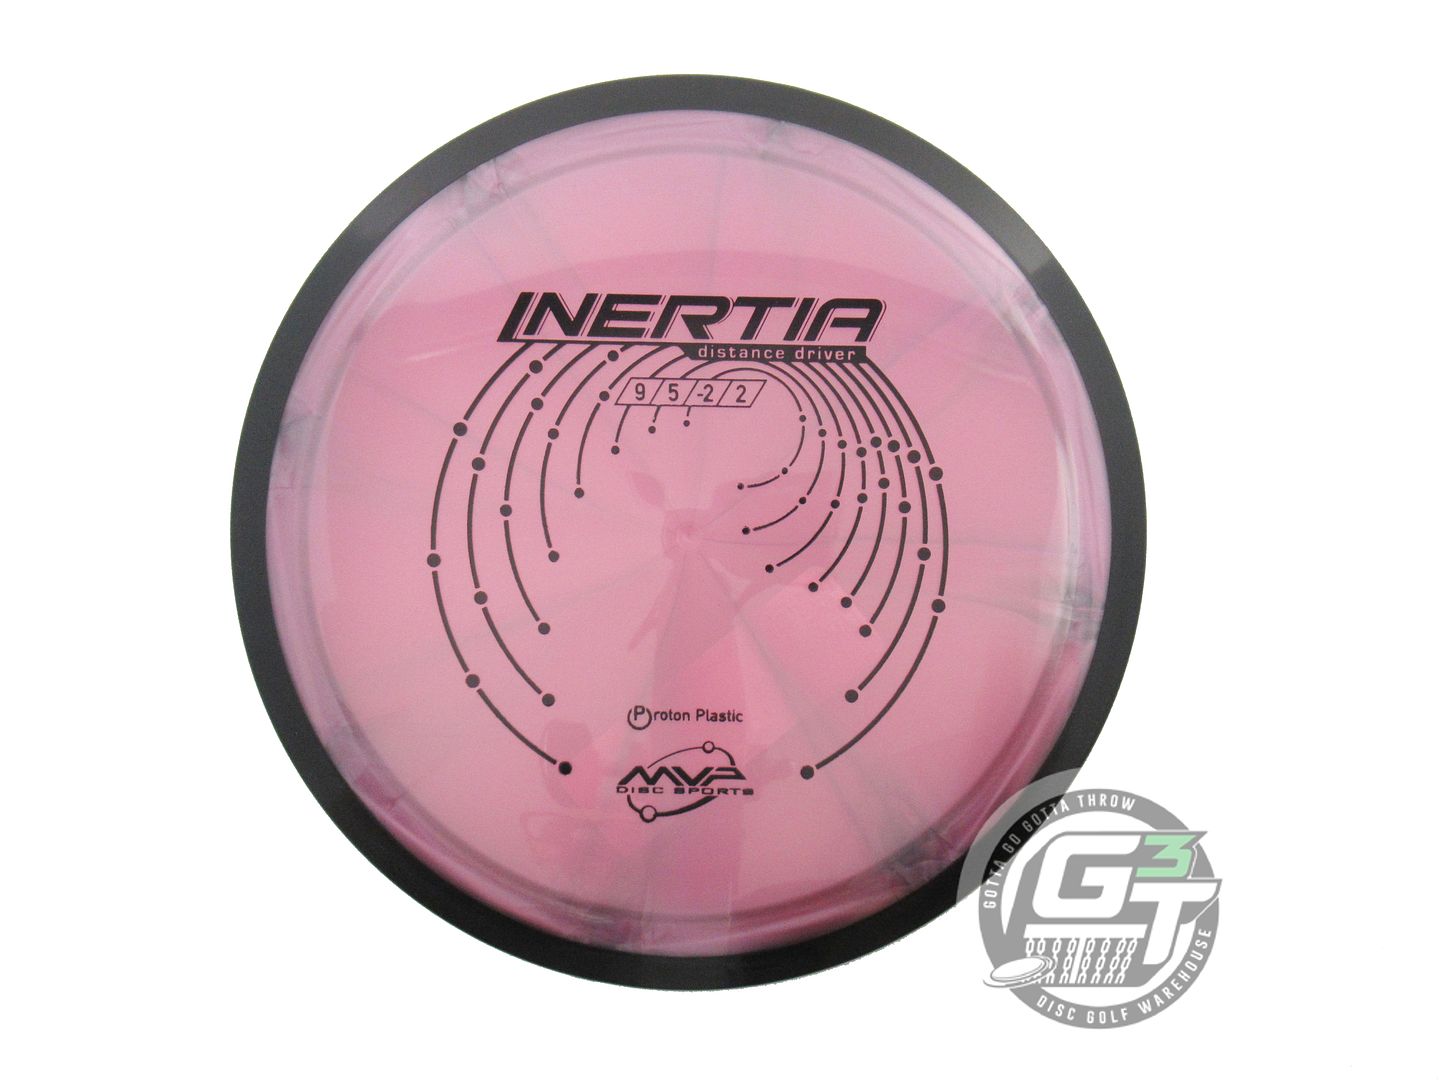 MVP Proton Inertia Distance Driver Golf Disc (Individually Listed)